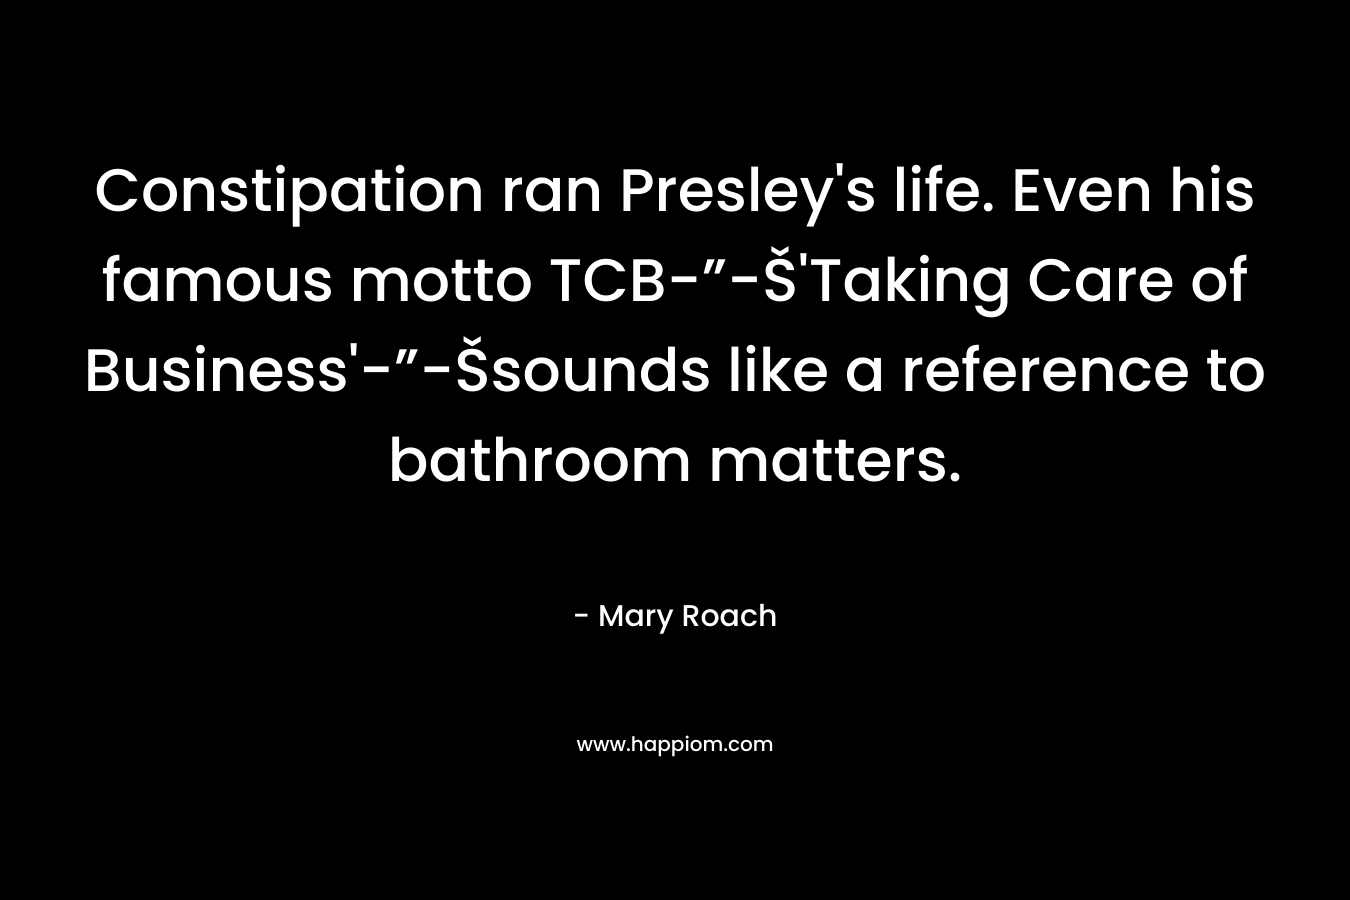 Constipation ran Presley's life. Even his famous motto TCB-”-Š'Taking Care of Business'-”-Šsounds like a reference to bathroom matters.